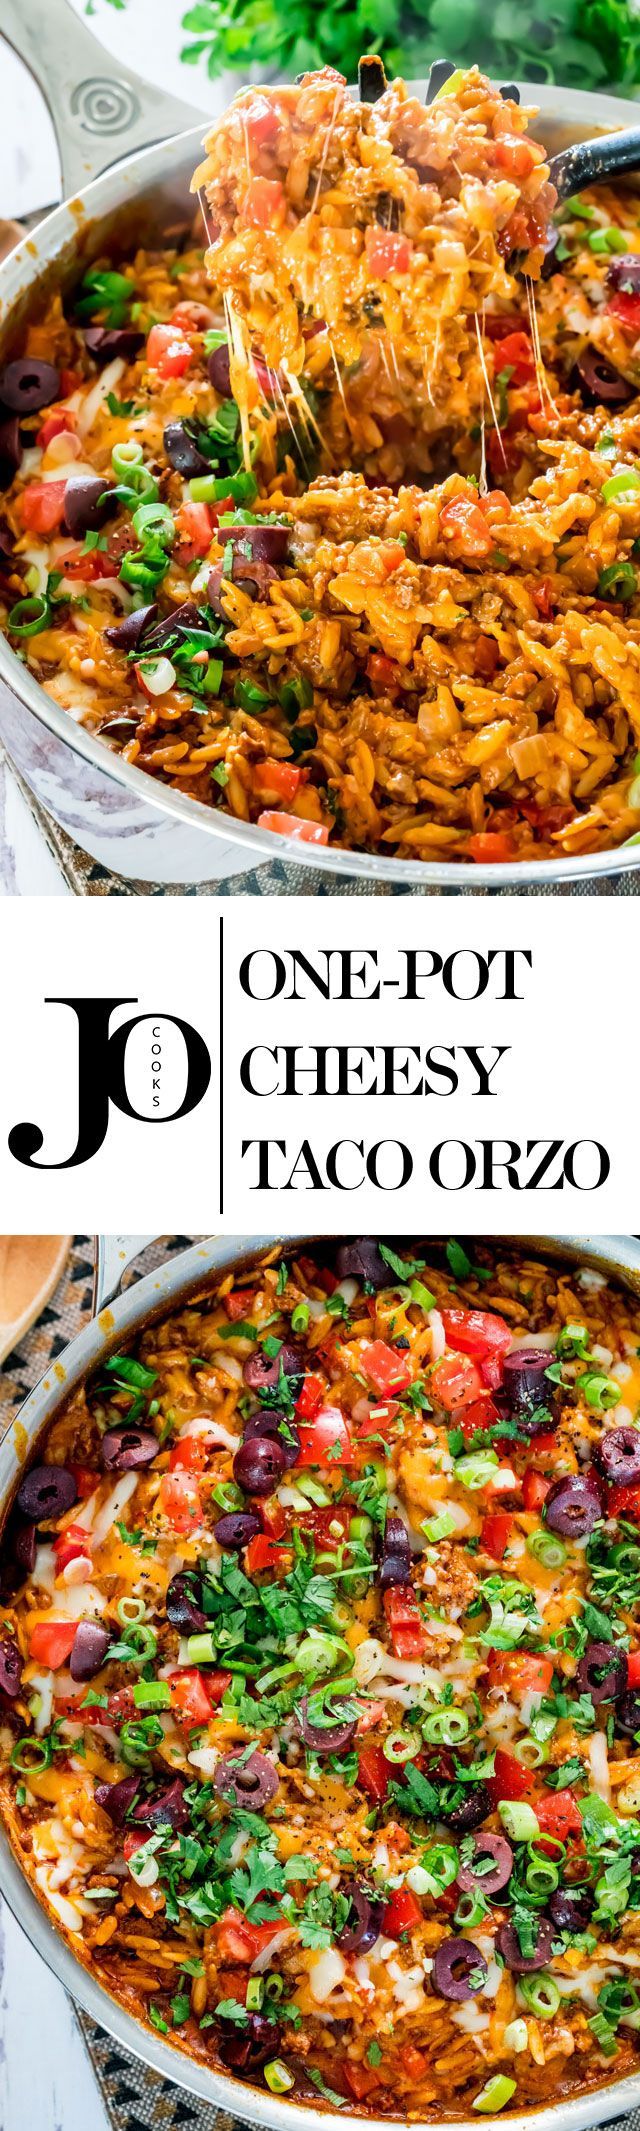 One Pot Cheesy Taco Orzo – picture the yumminess with this quick and delicious pot of perfect comfort food, ready in 30 minutes!